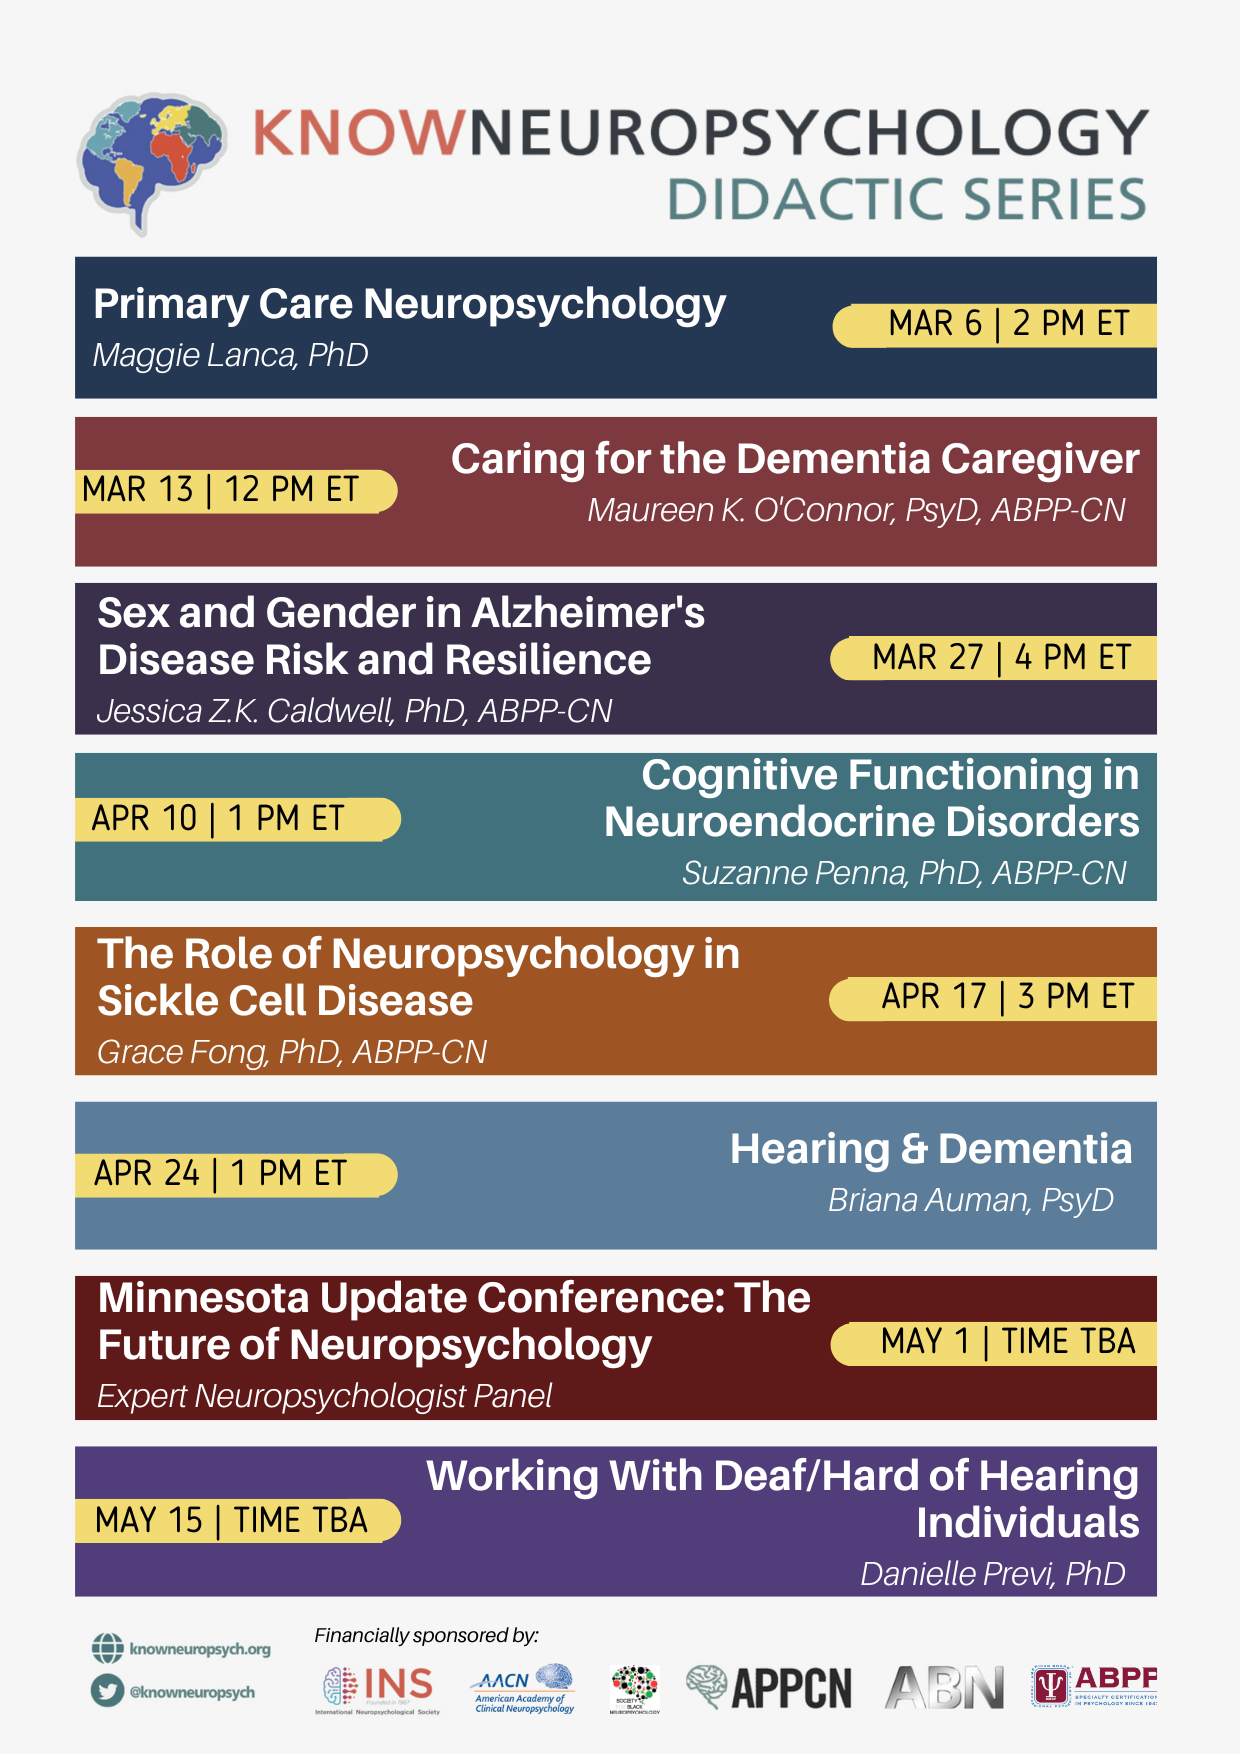 KnowNeuropsychology Volume 7 Schedule: Primary Care Neuropsychology with Dr. Maggie Lanca on March 6 at 2pm Eastern Time, Caring for the Dementia Caregiver with Dr. Maureen O’Connor on March 13 at 12pm ET, Sex and Gender in Alzheimer’s Disease Risk and Resilience on March 27 at 4pm ET, Cognitive Functioning in Neuroendocrine Disorders with Dr. Suzanne Penna on April 10 at 1pm ET, The Role of Neuropsychology in Sickle Cell Disease with Dr. Grace Fong on April 17 at 3pm ET, Hearing and Dementia with Dr. Briana Auman on April 24 at 1pm ET, Minnesota Update Conference: The Future of Neuropsychology with Expert Neuropsychologist Panel on May 1, Time To be announced, Working with Deaf/Hard of Hearing Individuals with Dr. Danielle Previ on May 15, Time to be announced.